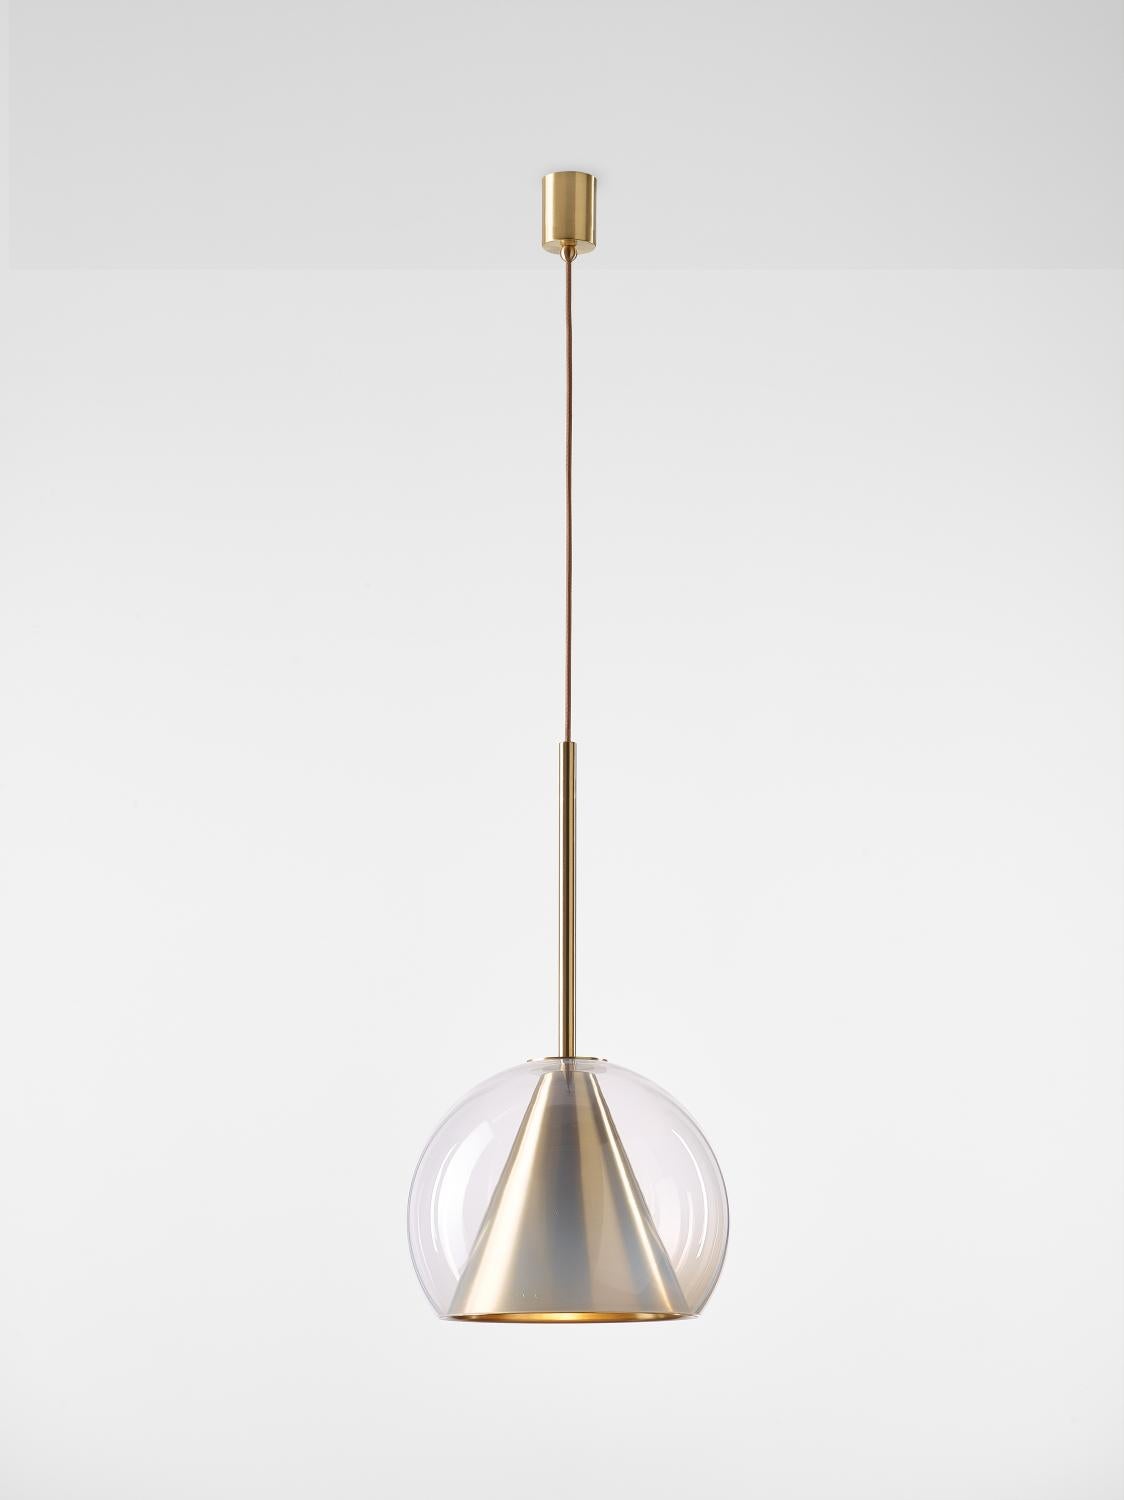 Set of 2 big Alabaster white kono pendant lights by Dechem Studio
Dimensions: D 35 x H 75 cm
Materials: brass, glass.
Also available: different finishes and colours available.

This collection of suspended light fixtures combines the elementary